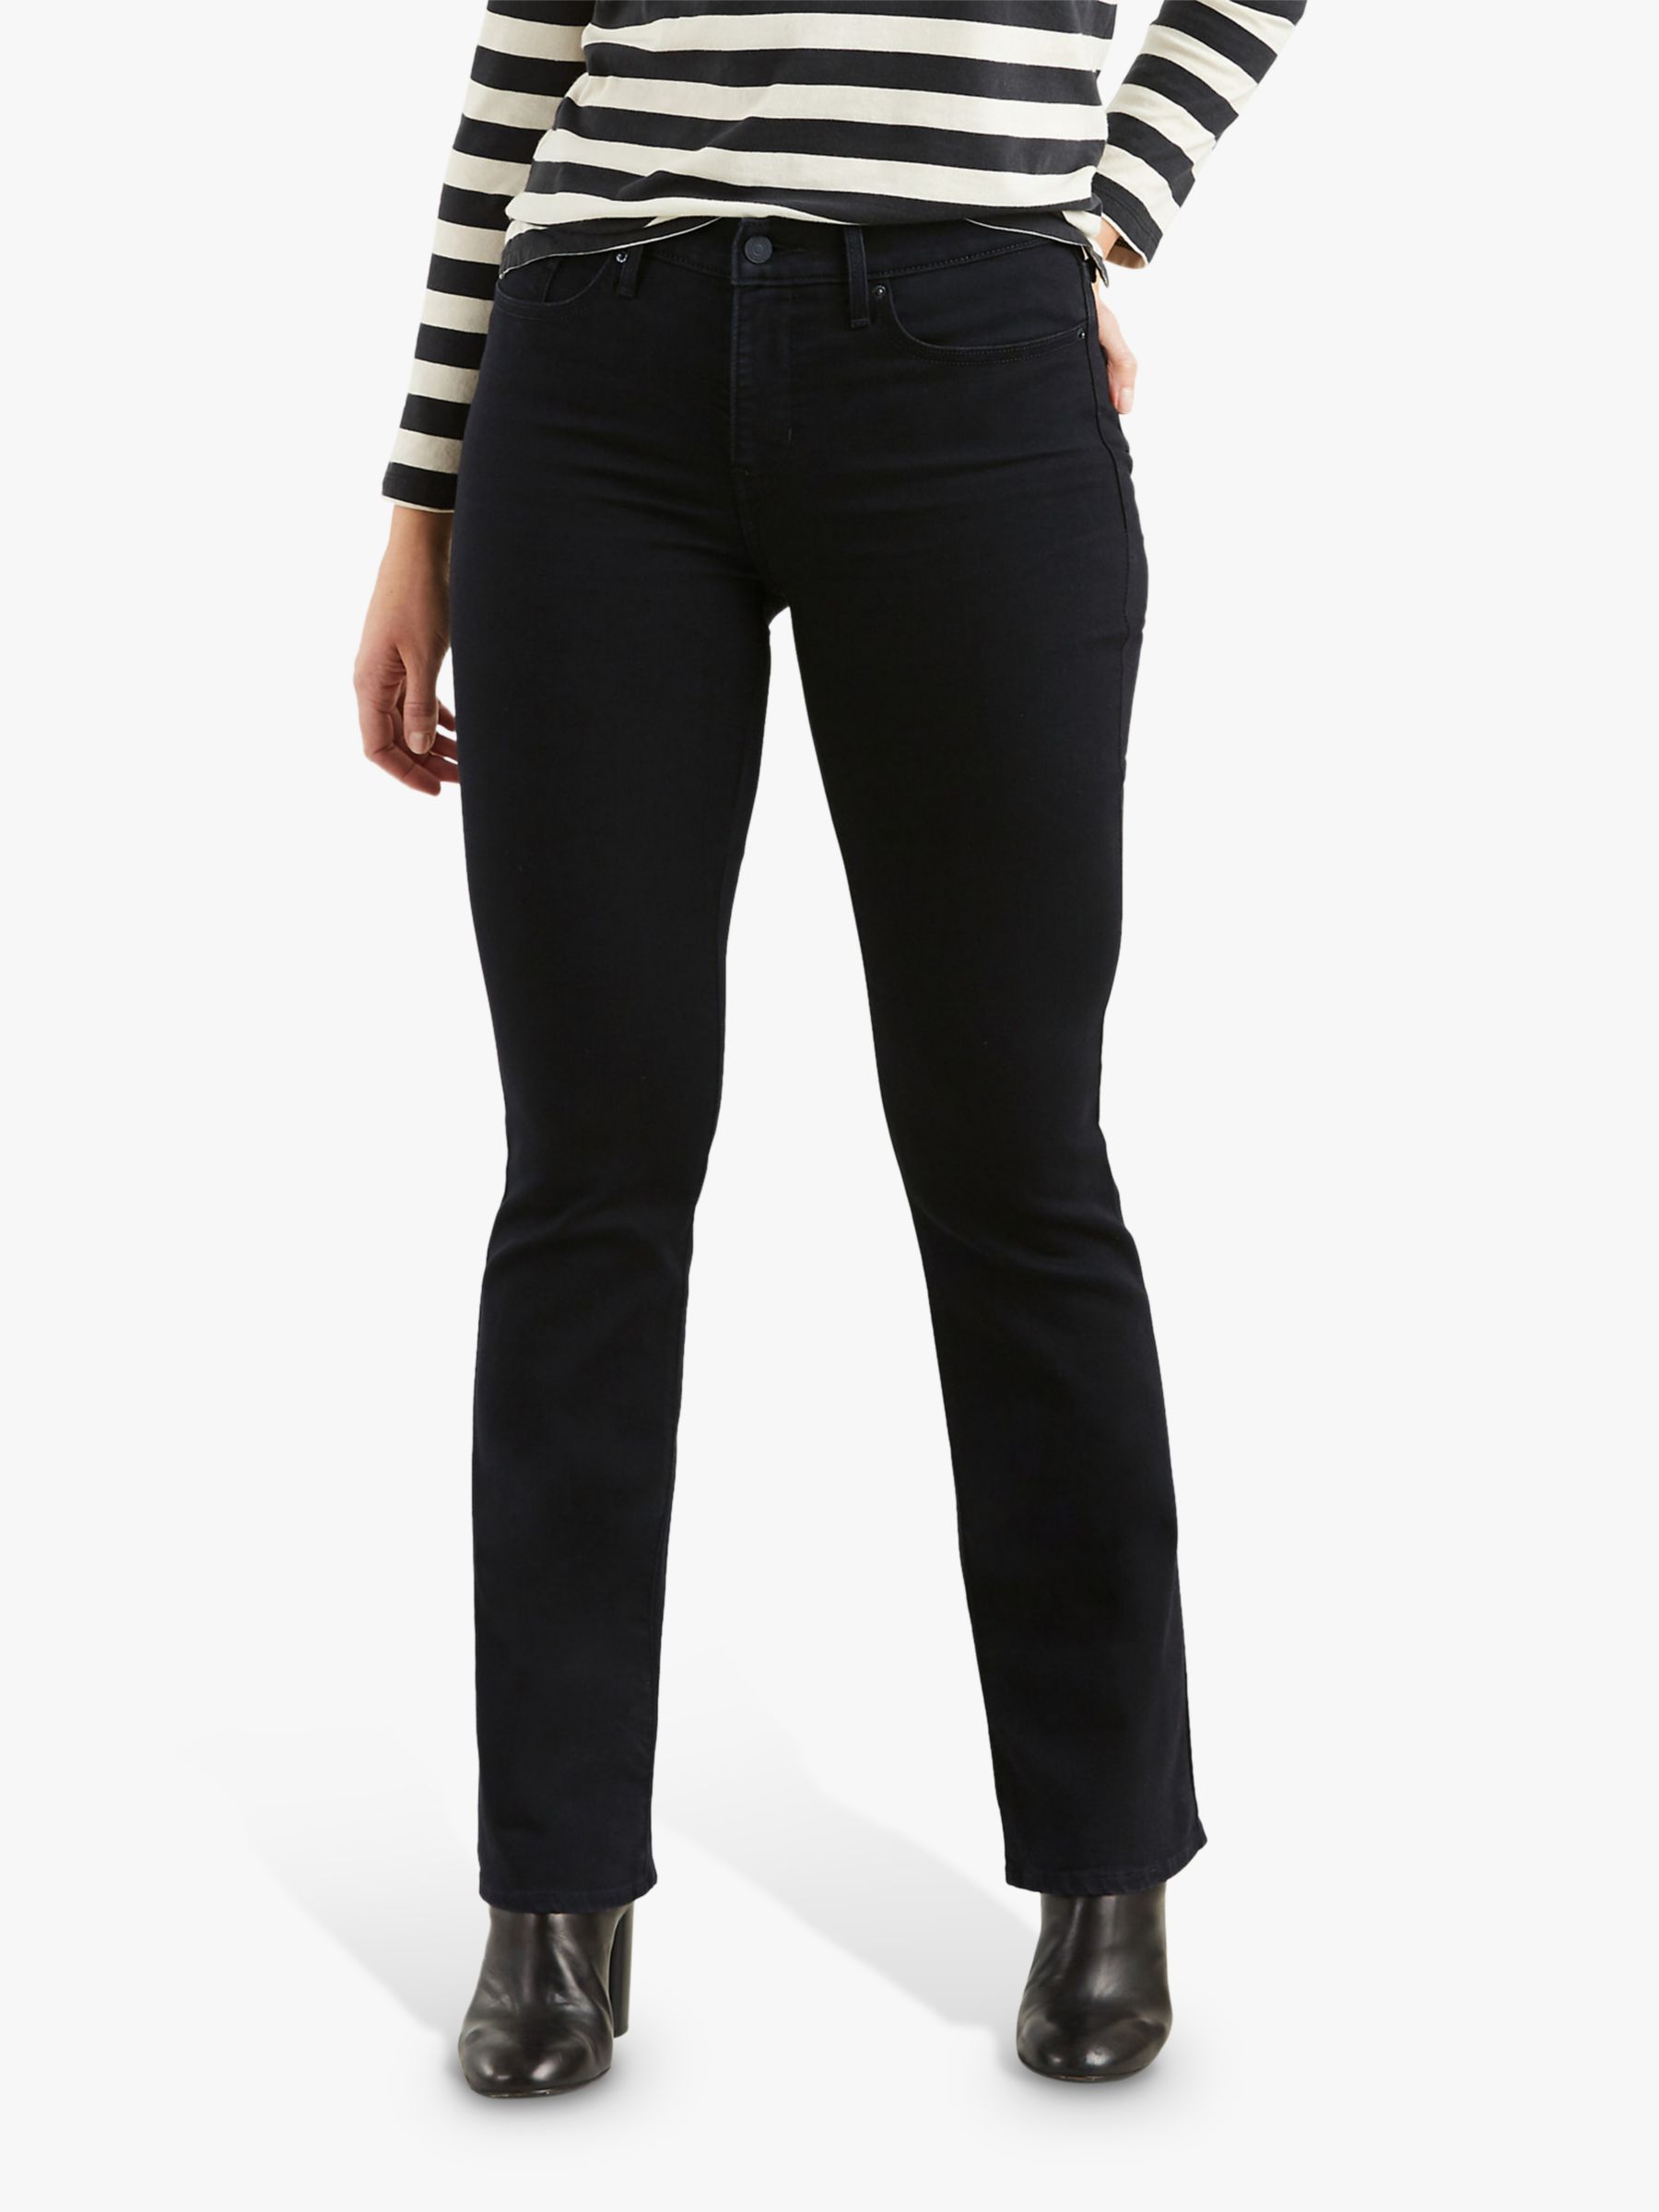 Levi's 315 Shaping Bootcut Jeans, Soft Black at John Lewis & Partners